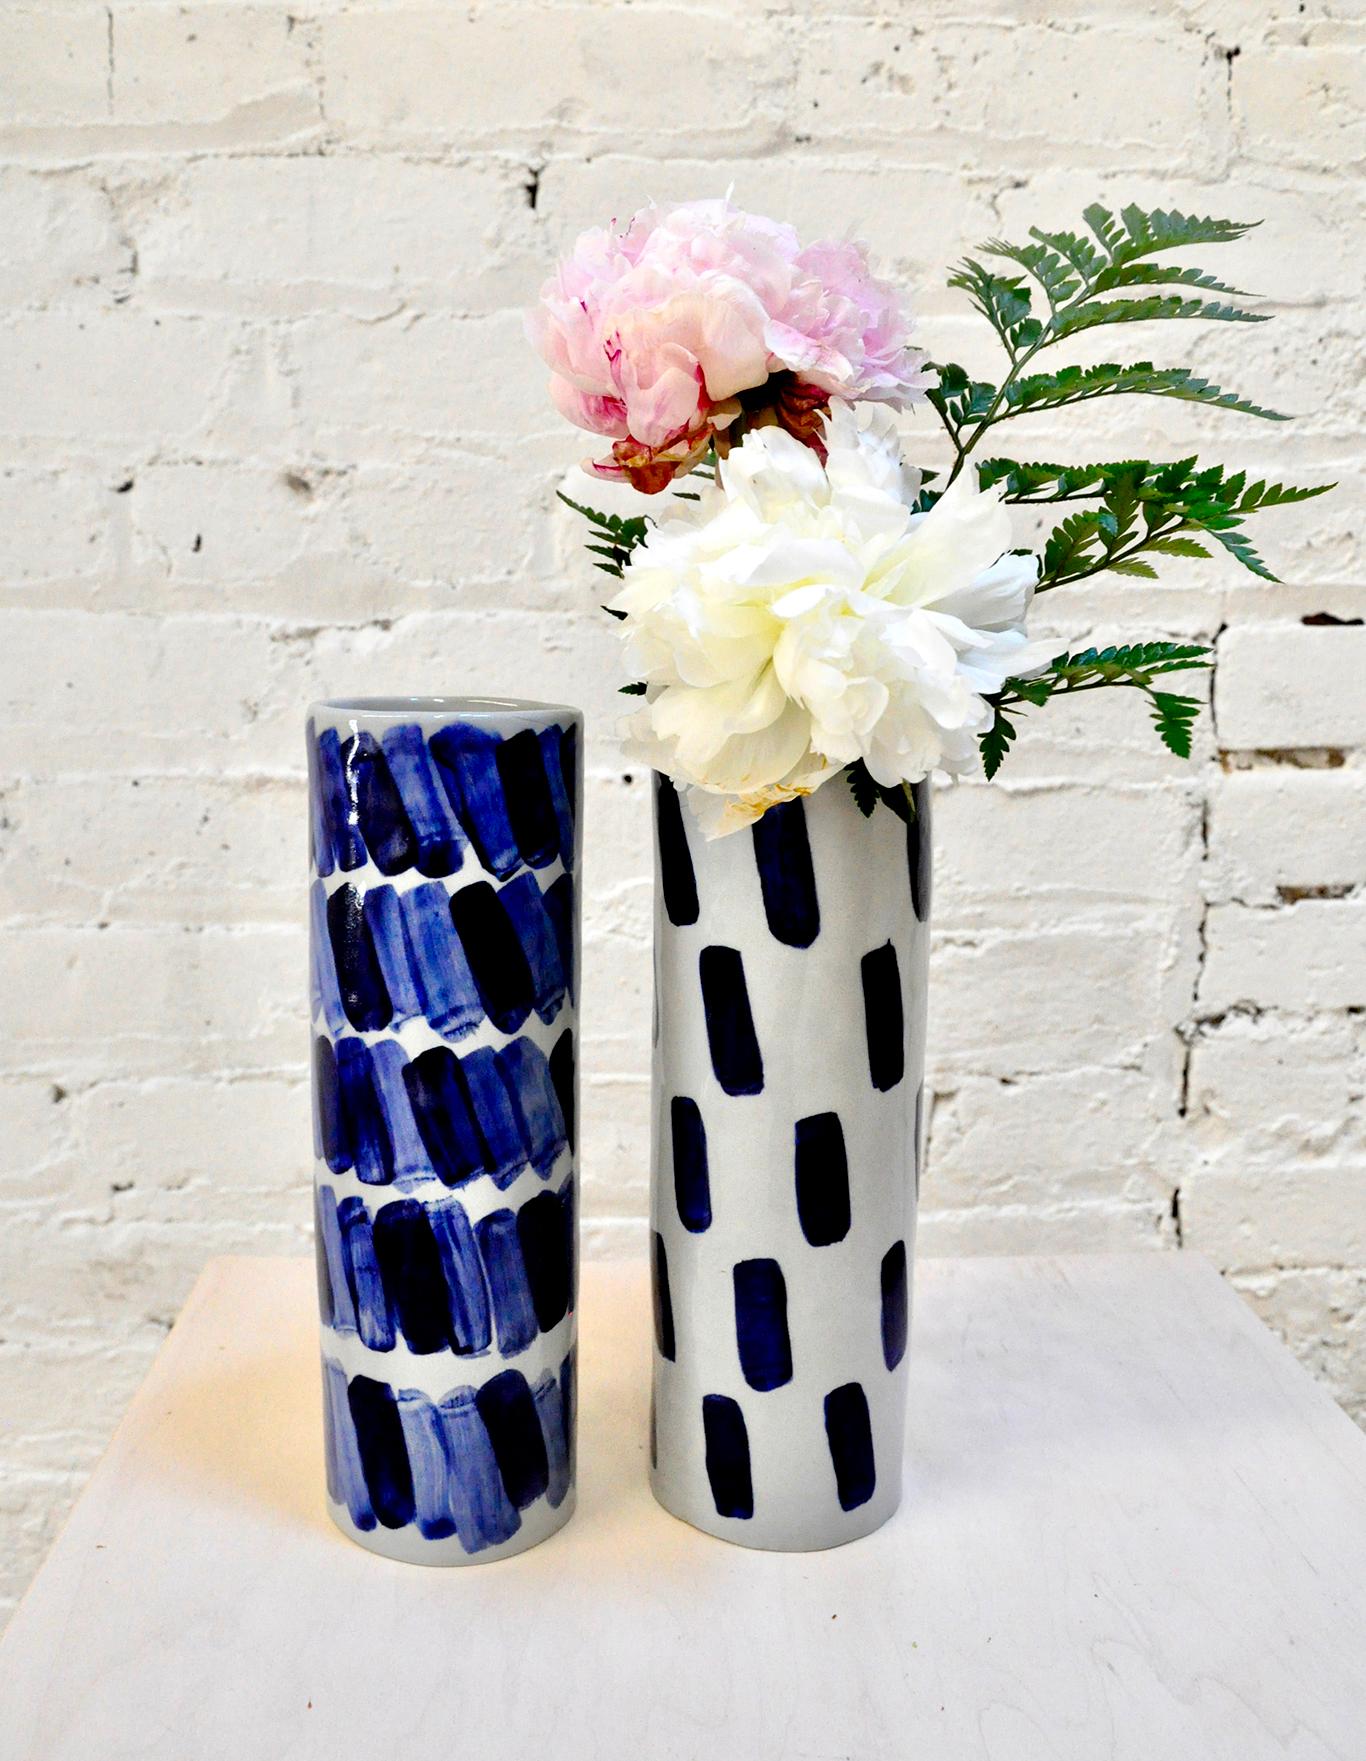 Hand-built vases by Isabel Halley, in hand-dyed pale grey porcelain with striking cobalt glaze brush strokes.

Dimensions: 8